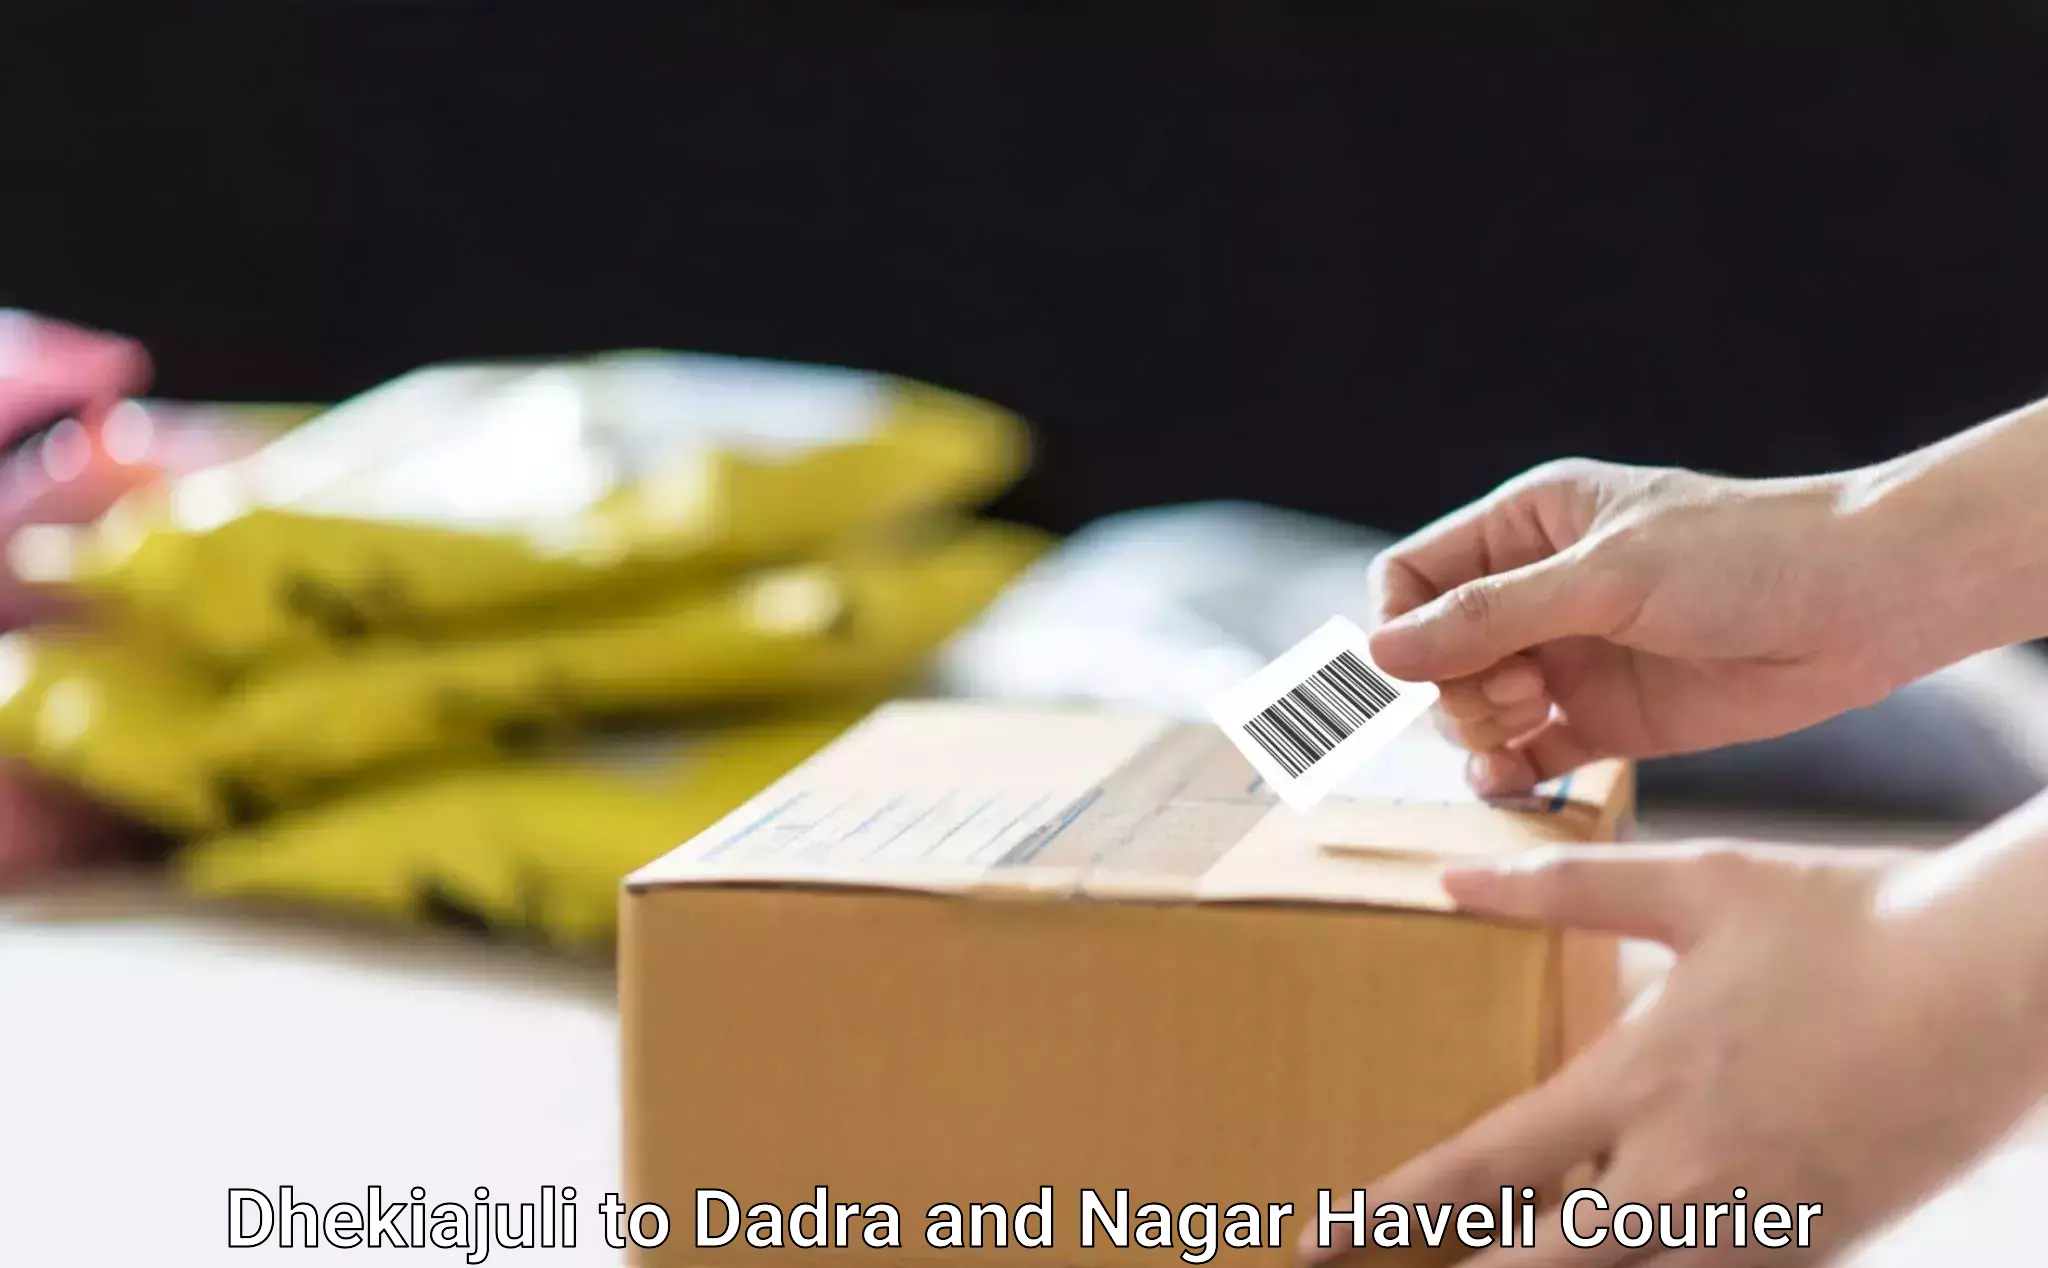 Customized delivery options in Dhekiajuli to Dadra and Nagar Haveli